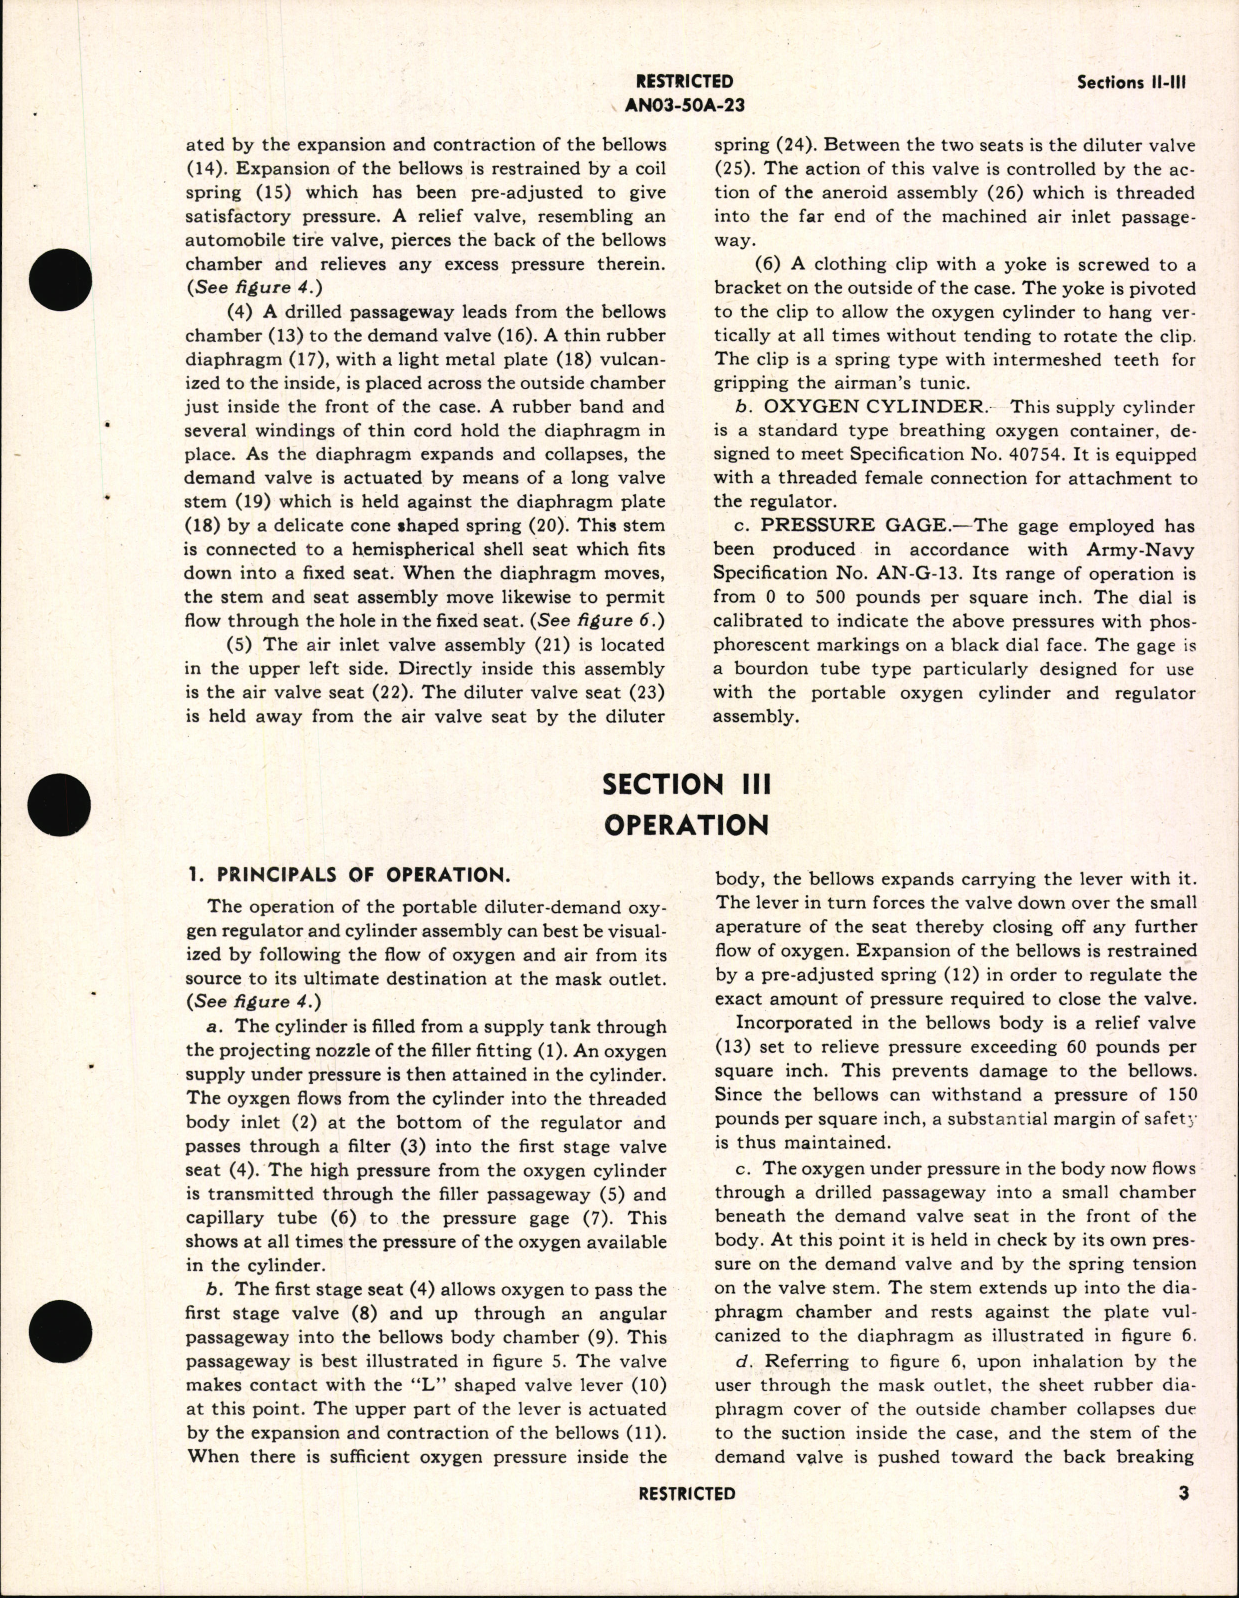 Sample page 7 from AirCorps Library document: Operation, Service and Overhaul Instructions for Portable Diluter Demand Oxygen Regulator Type A-15